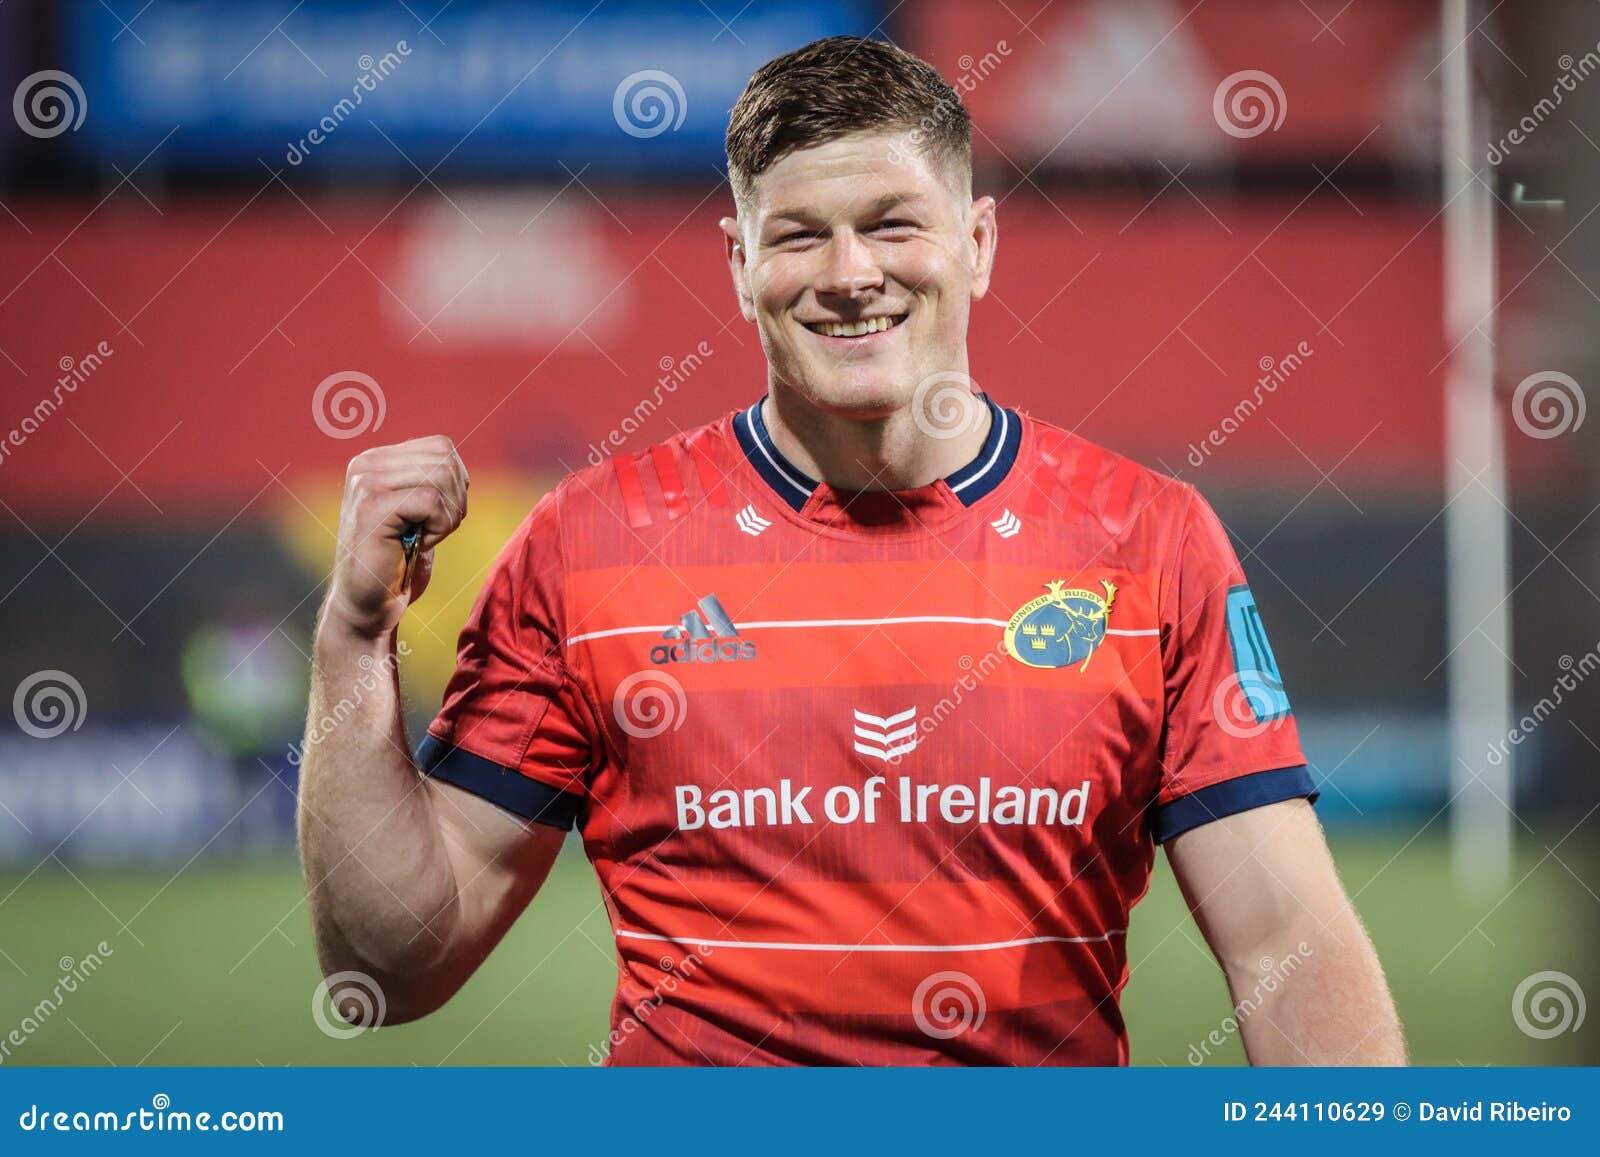 Jack O Donoghue at the United Rugby Championship Match between Munster 51 and Benetton 22 Editorial Stock Image